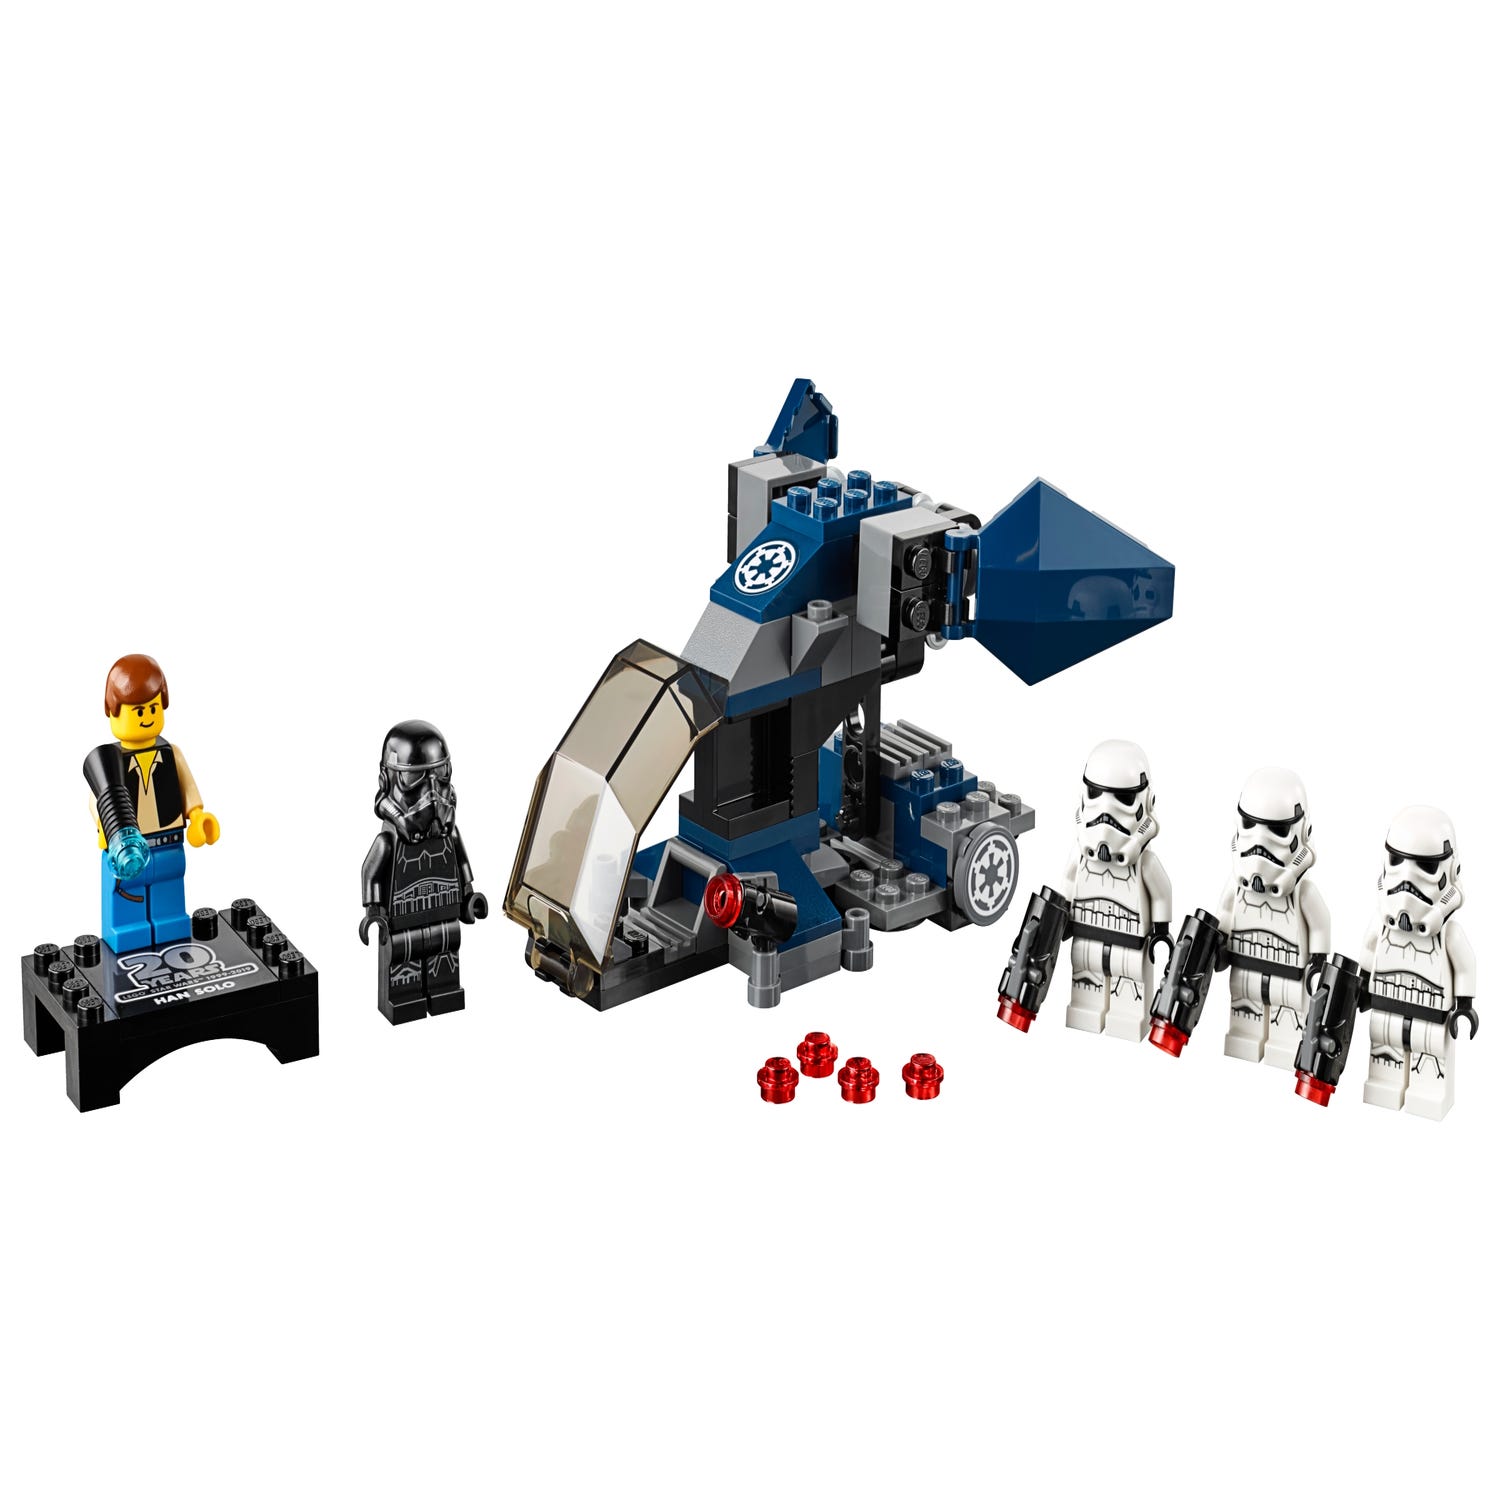 Imperial – 20th Anniversary Edition 75262 | Star Wars™ | Buy online at Official LEGO® Shop US